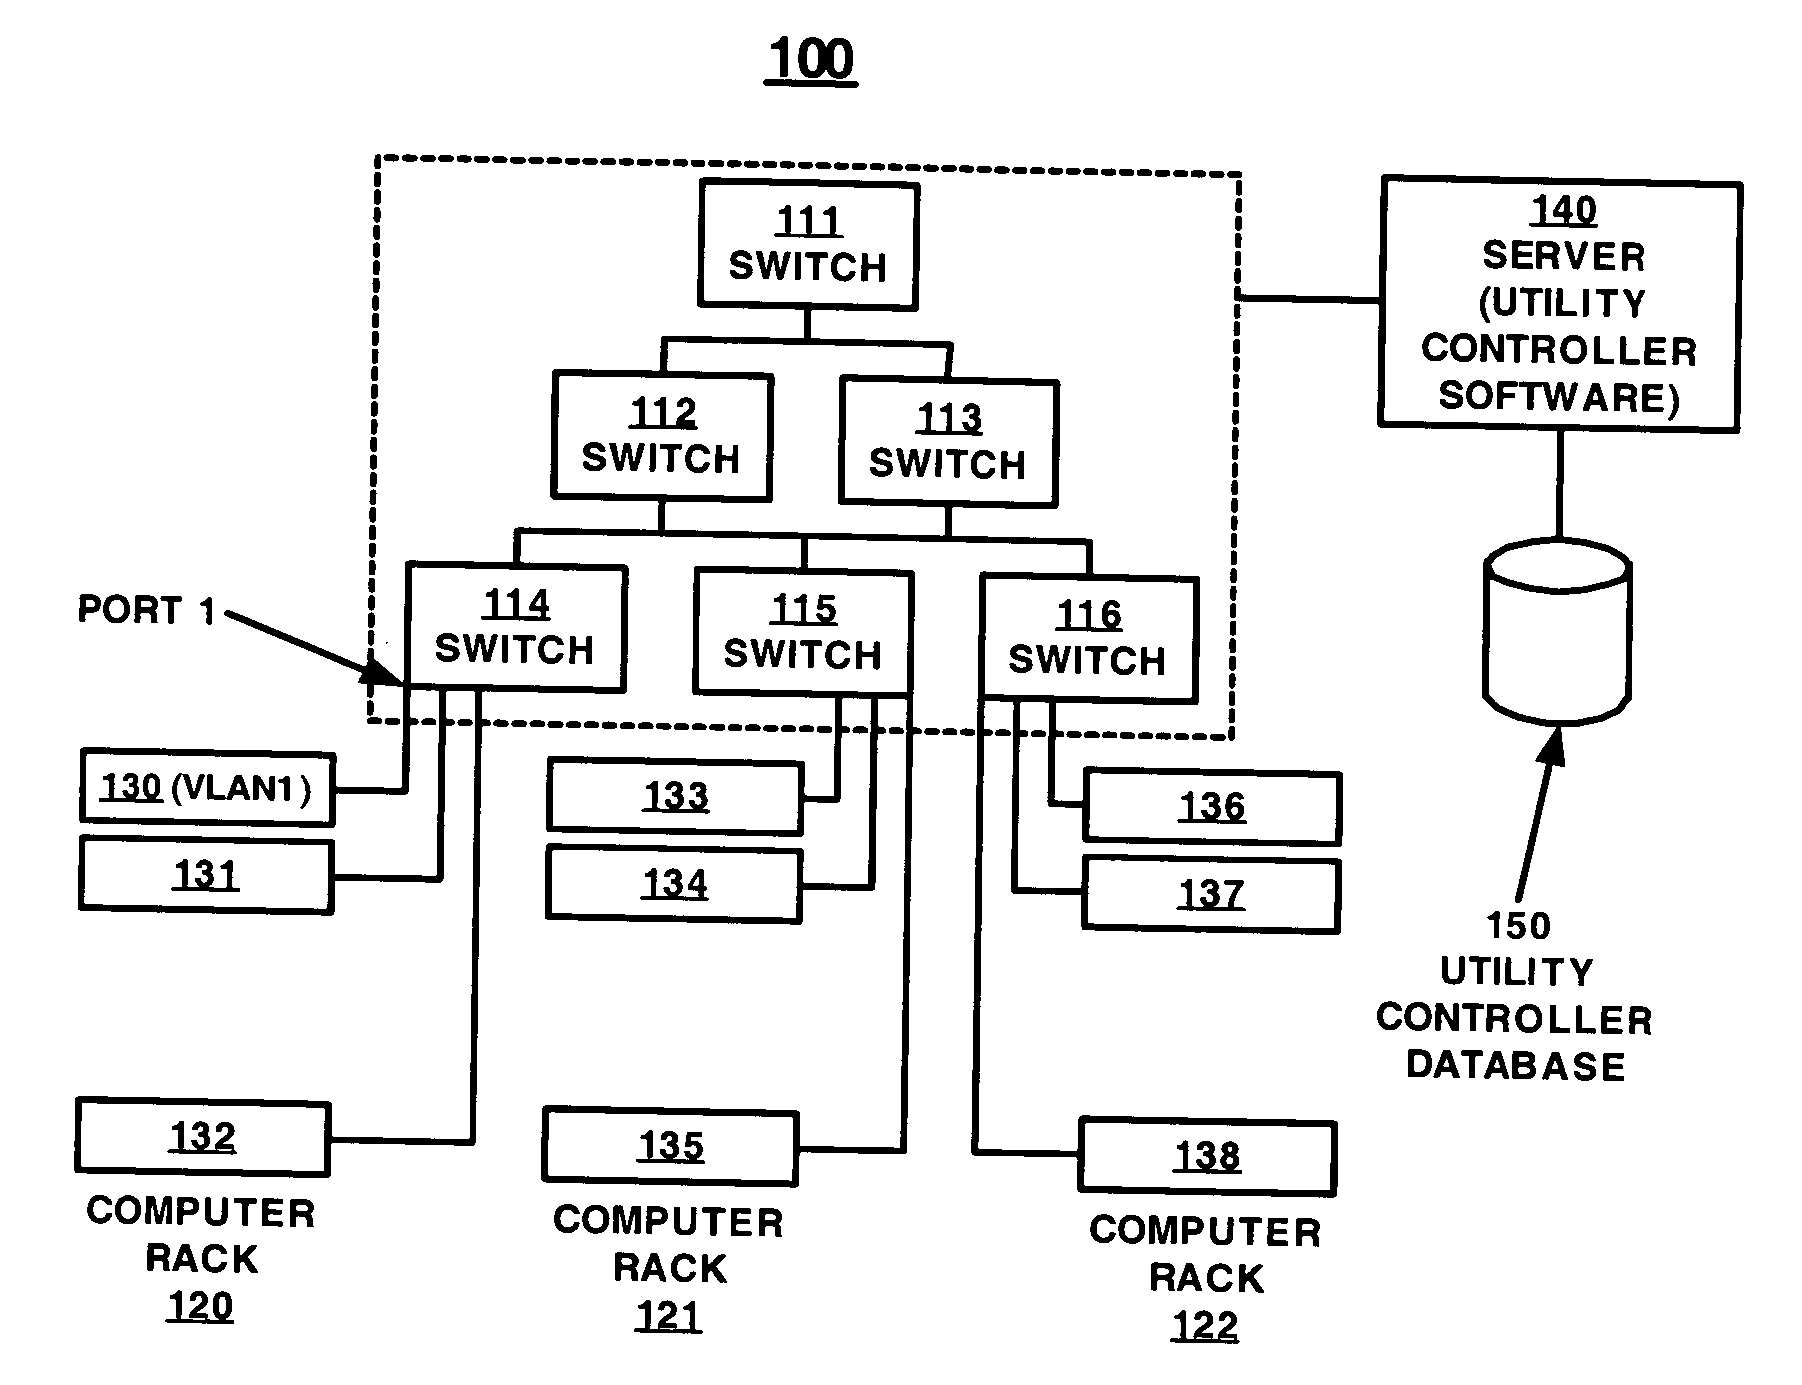 Method and apparatus for automatic and secure distribution of a symmetric key security credential in a utility computing environment